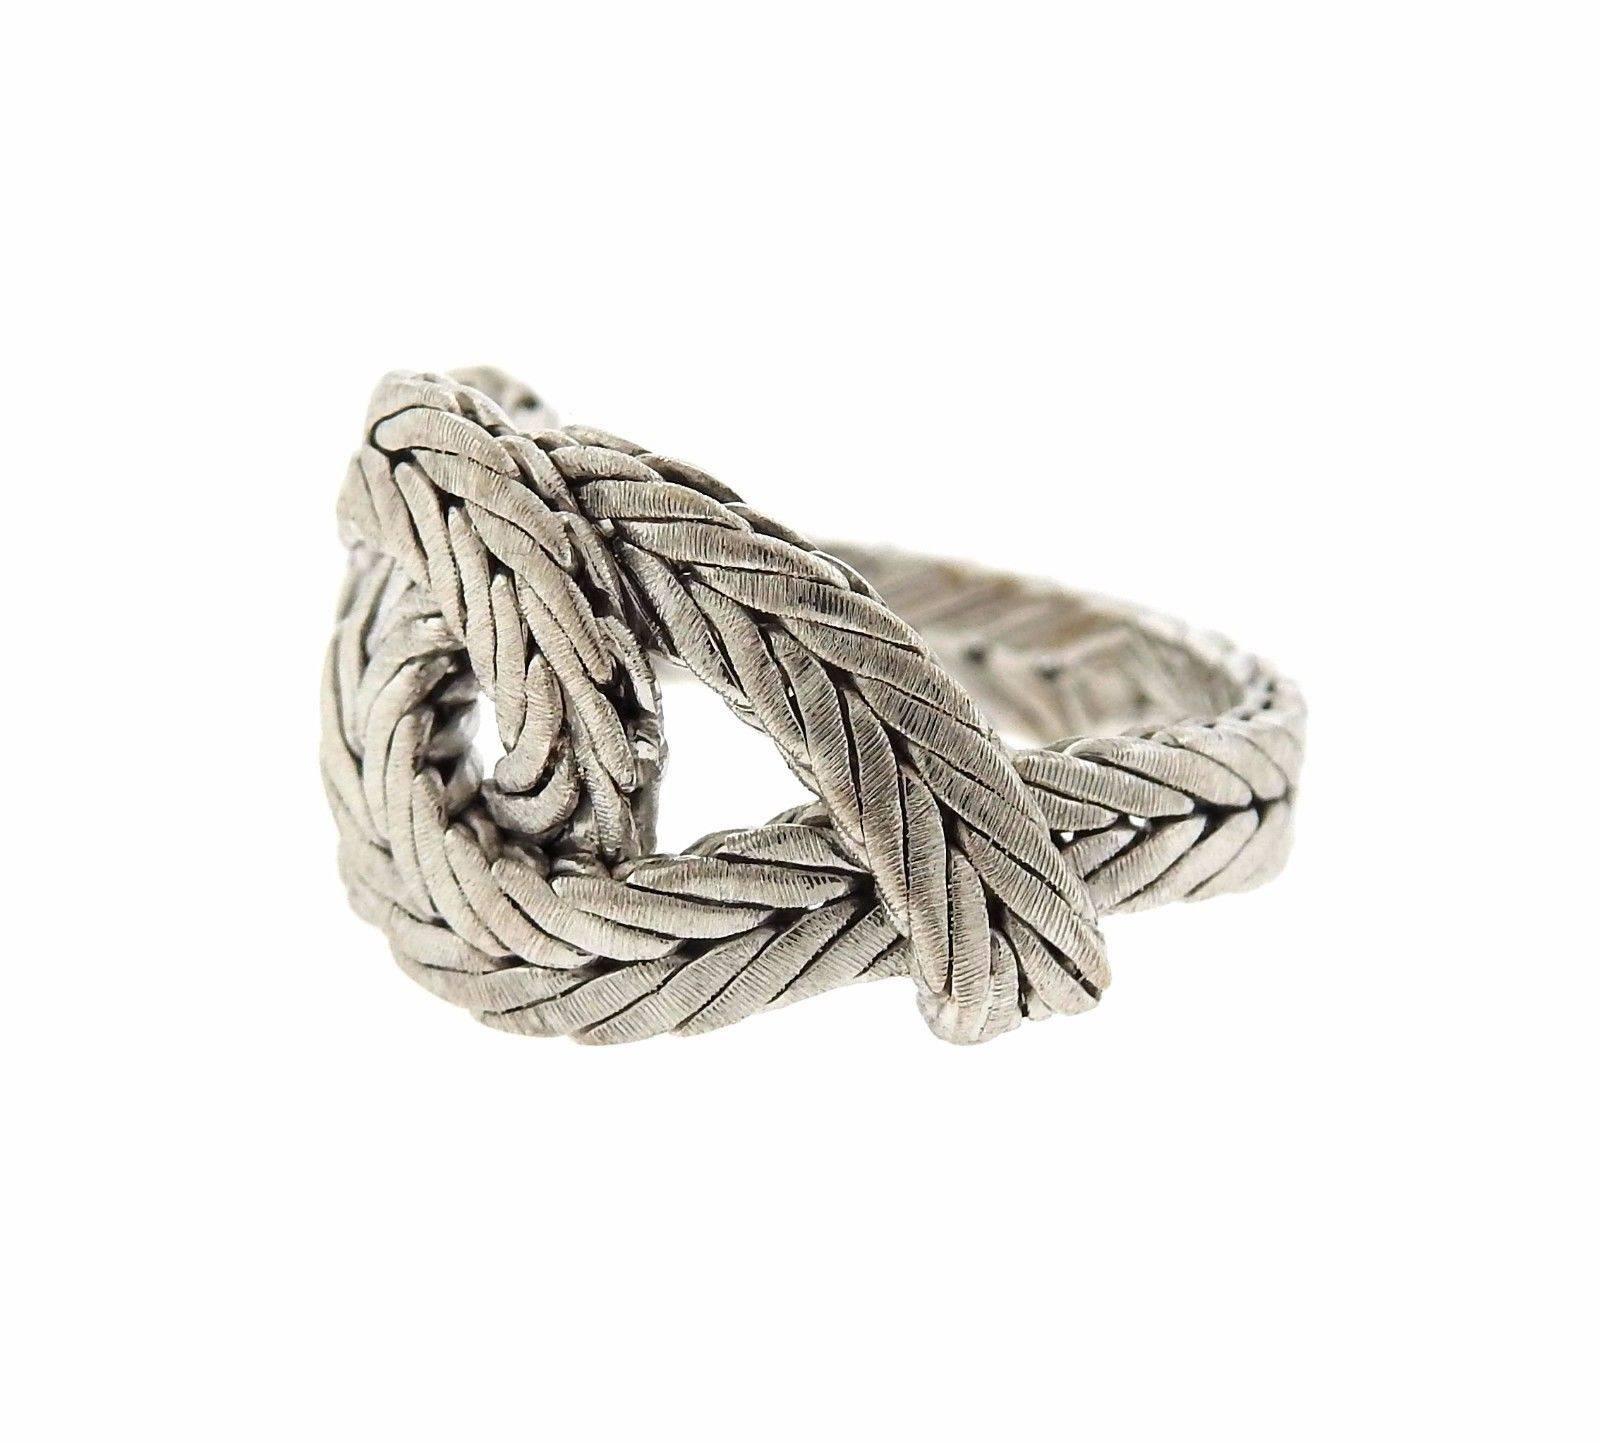 An 18k white gold braided ring by Buccellati.  The ring is a size 6, top is 13mm wide.  The weight of the ring is 7.7 grams. Marked: Buccellati, 750, Italian mark Current retail is $3590.